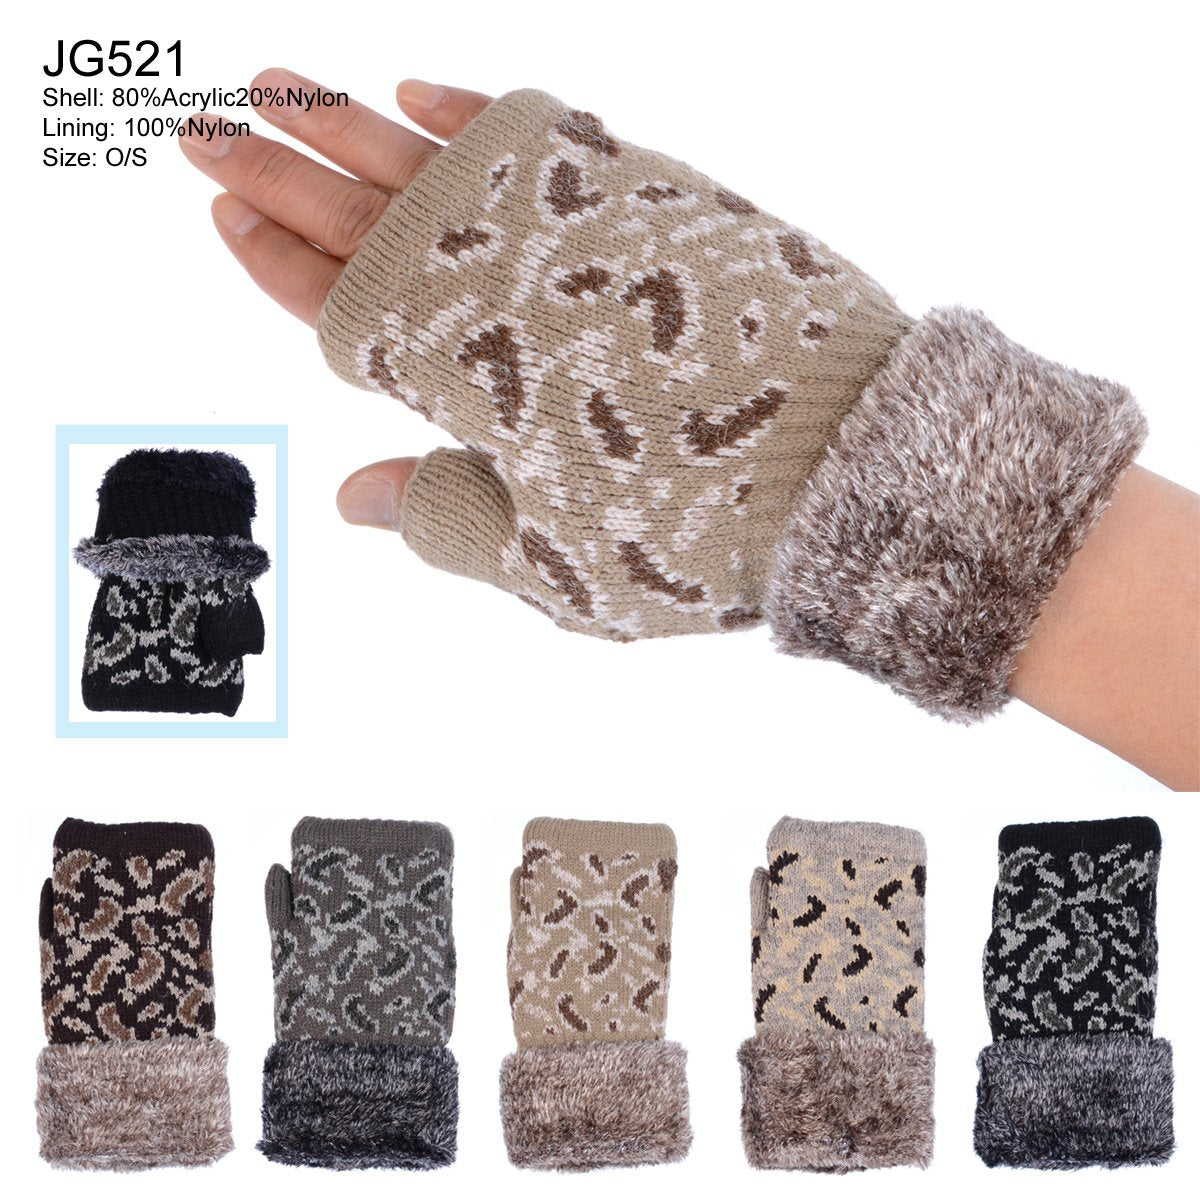 Animal Print Knitted Fingerless Gloves W/ Cuffs & Chenille Lining - 12Pc Set